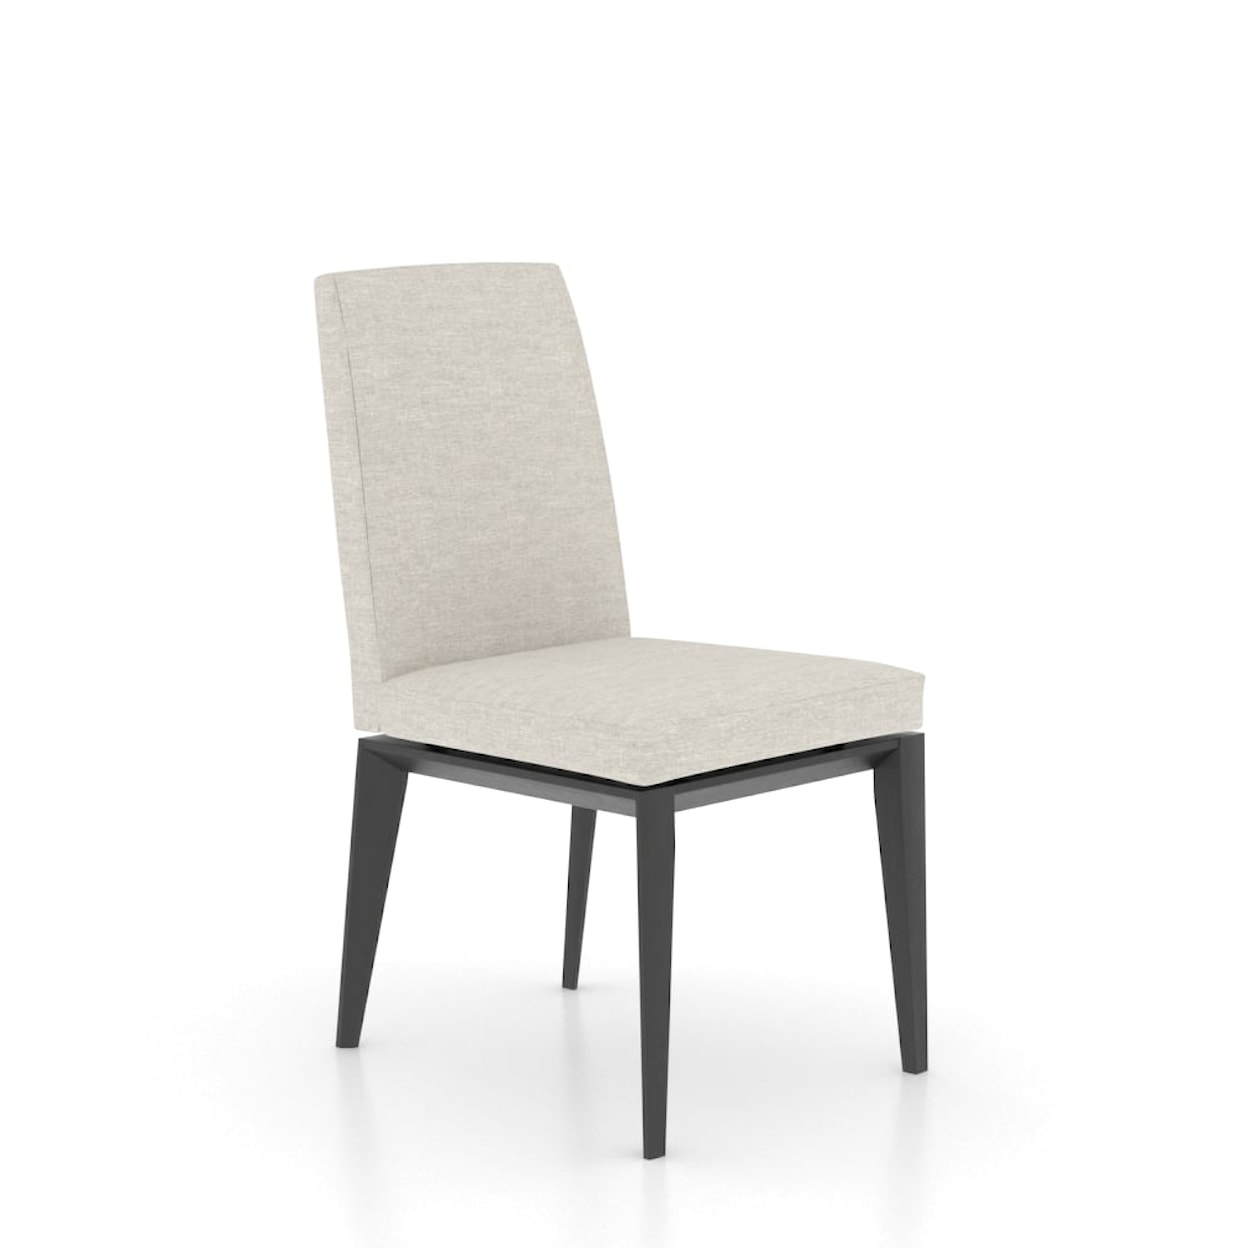 Canadel Downtown Upholstered Fixed Chair